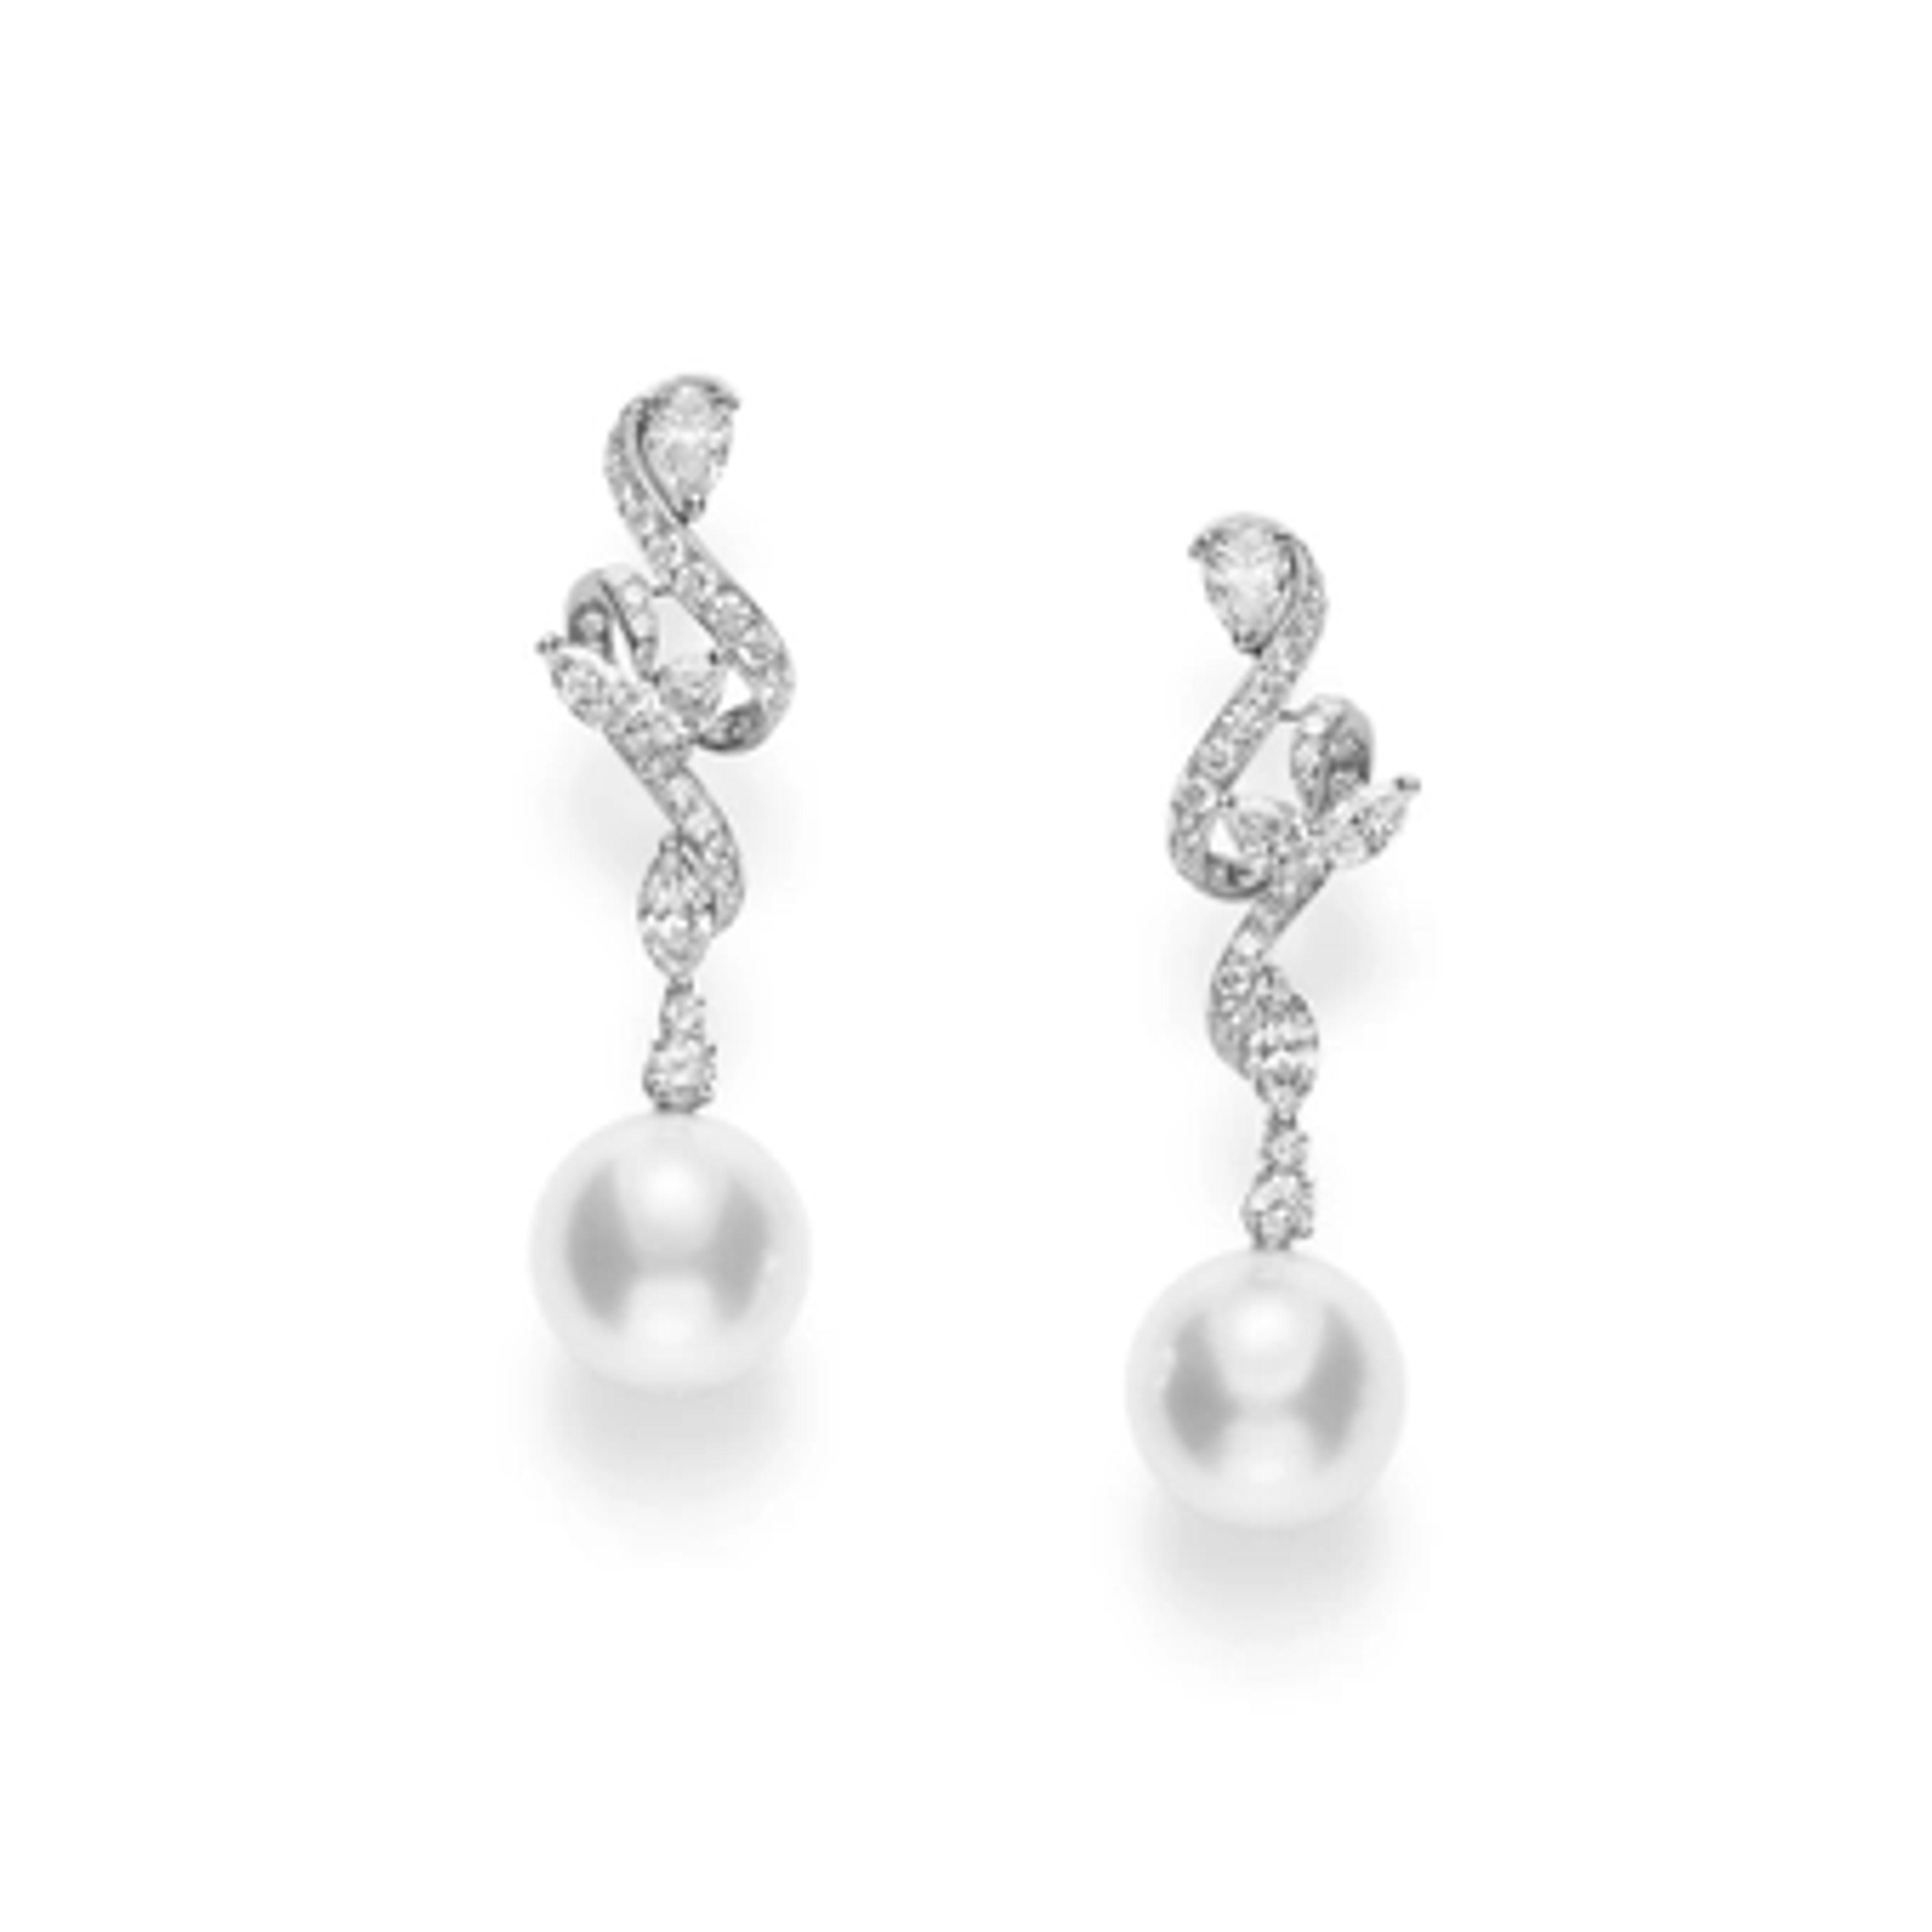 Classic White South Sea Cultured Pearl and Diamond Earrings